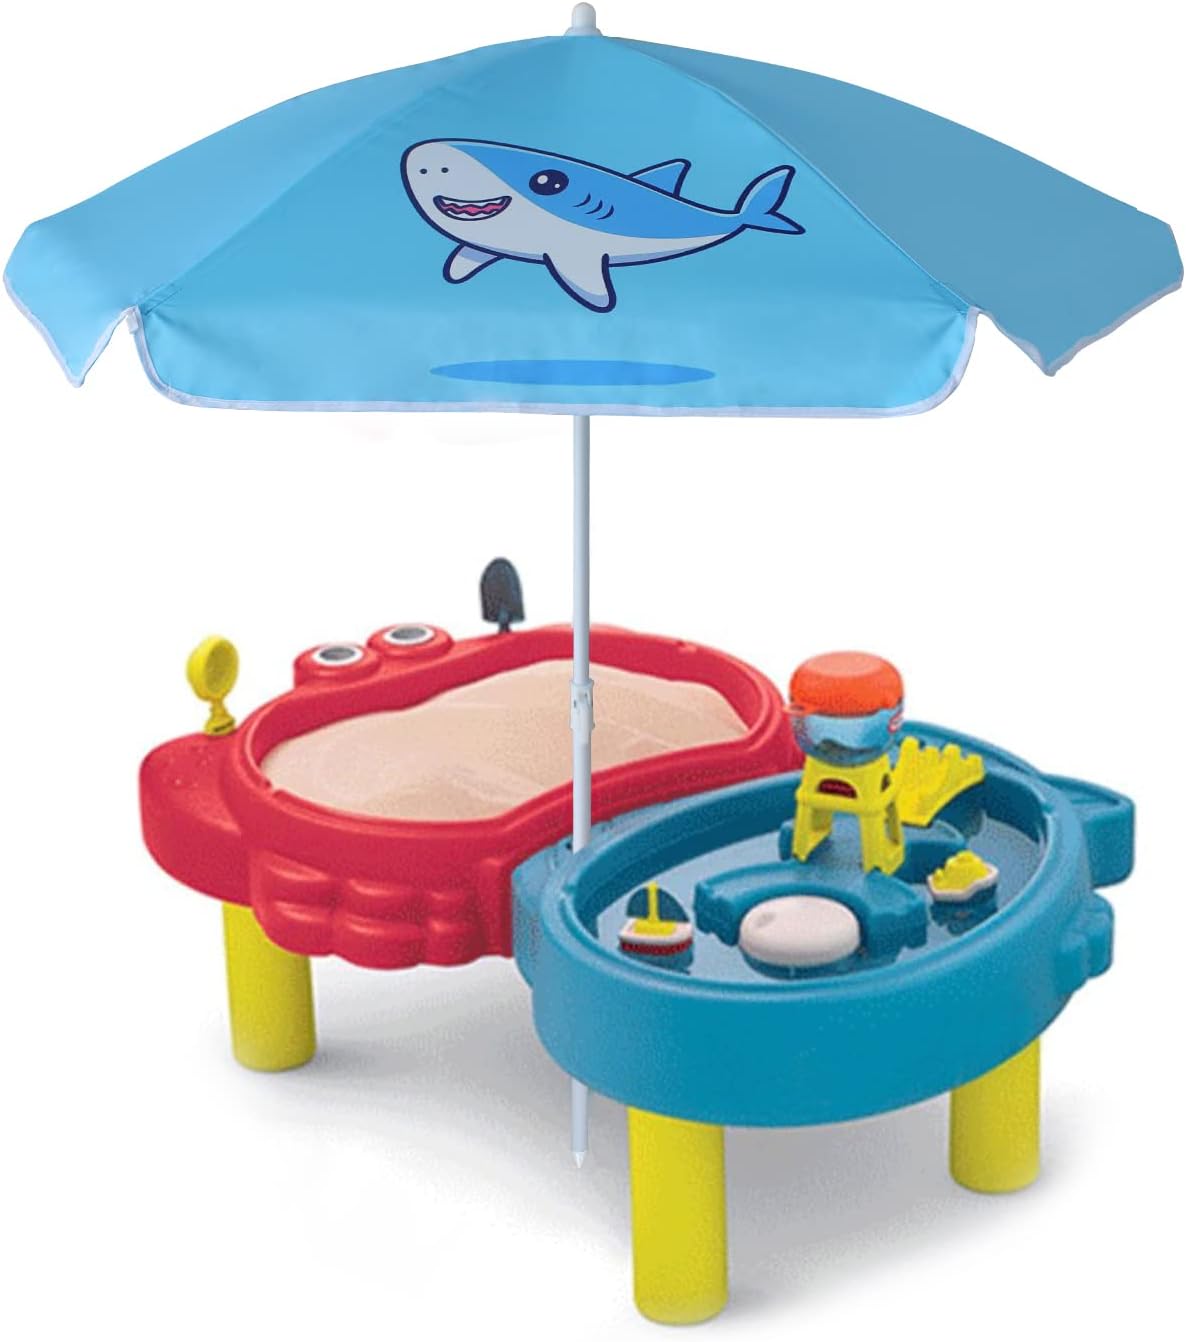 AMMSUN 47 inches kid Umbrella for Sand and Water Table Blue Shark